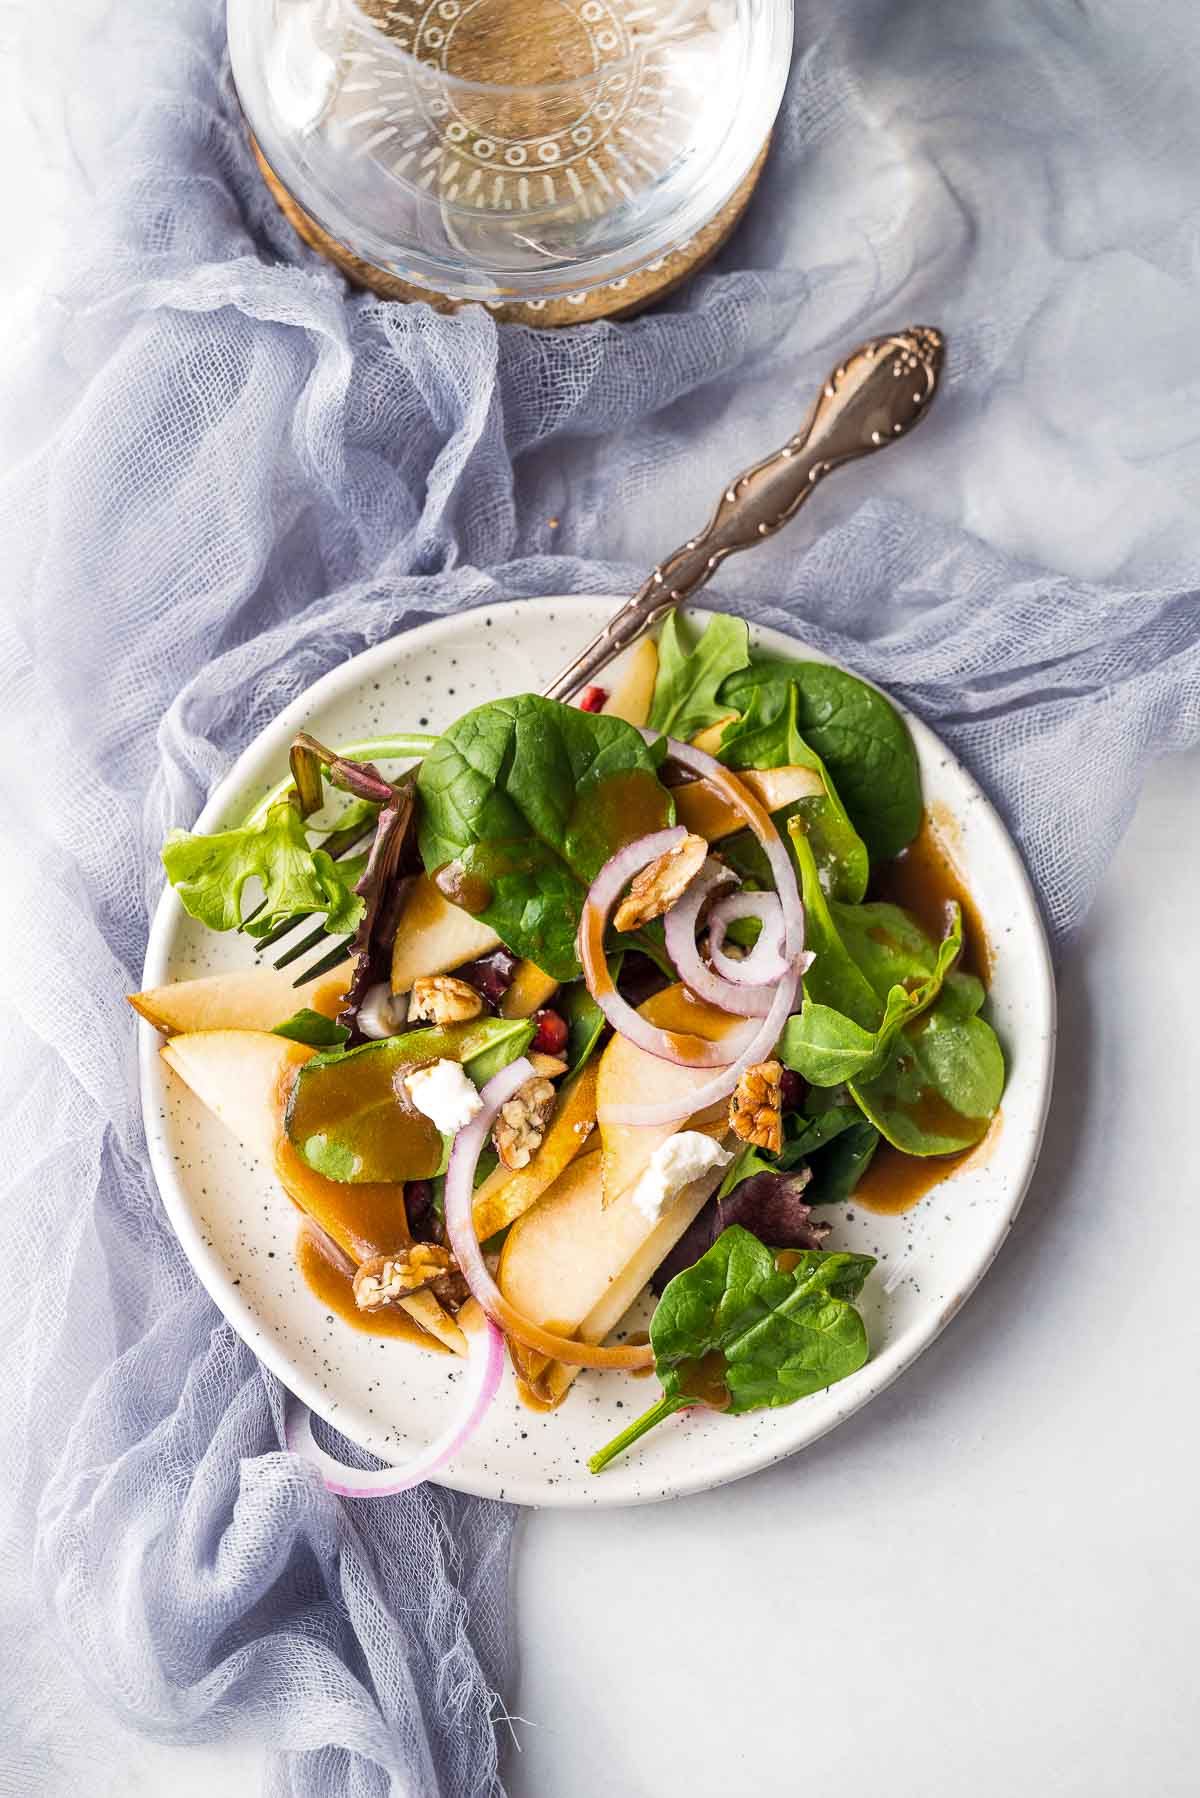 pear salad with dressing on plate.